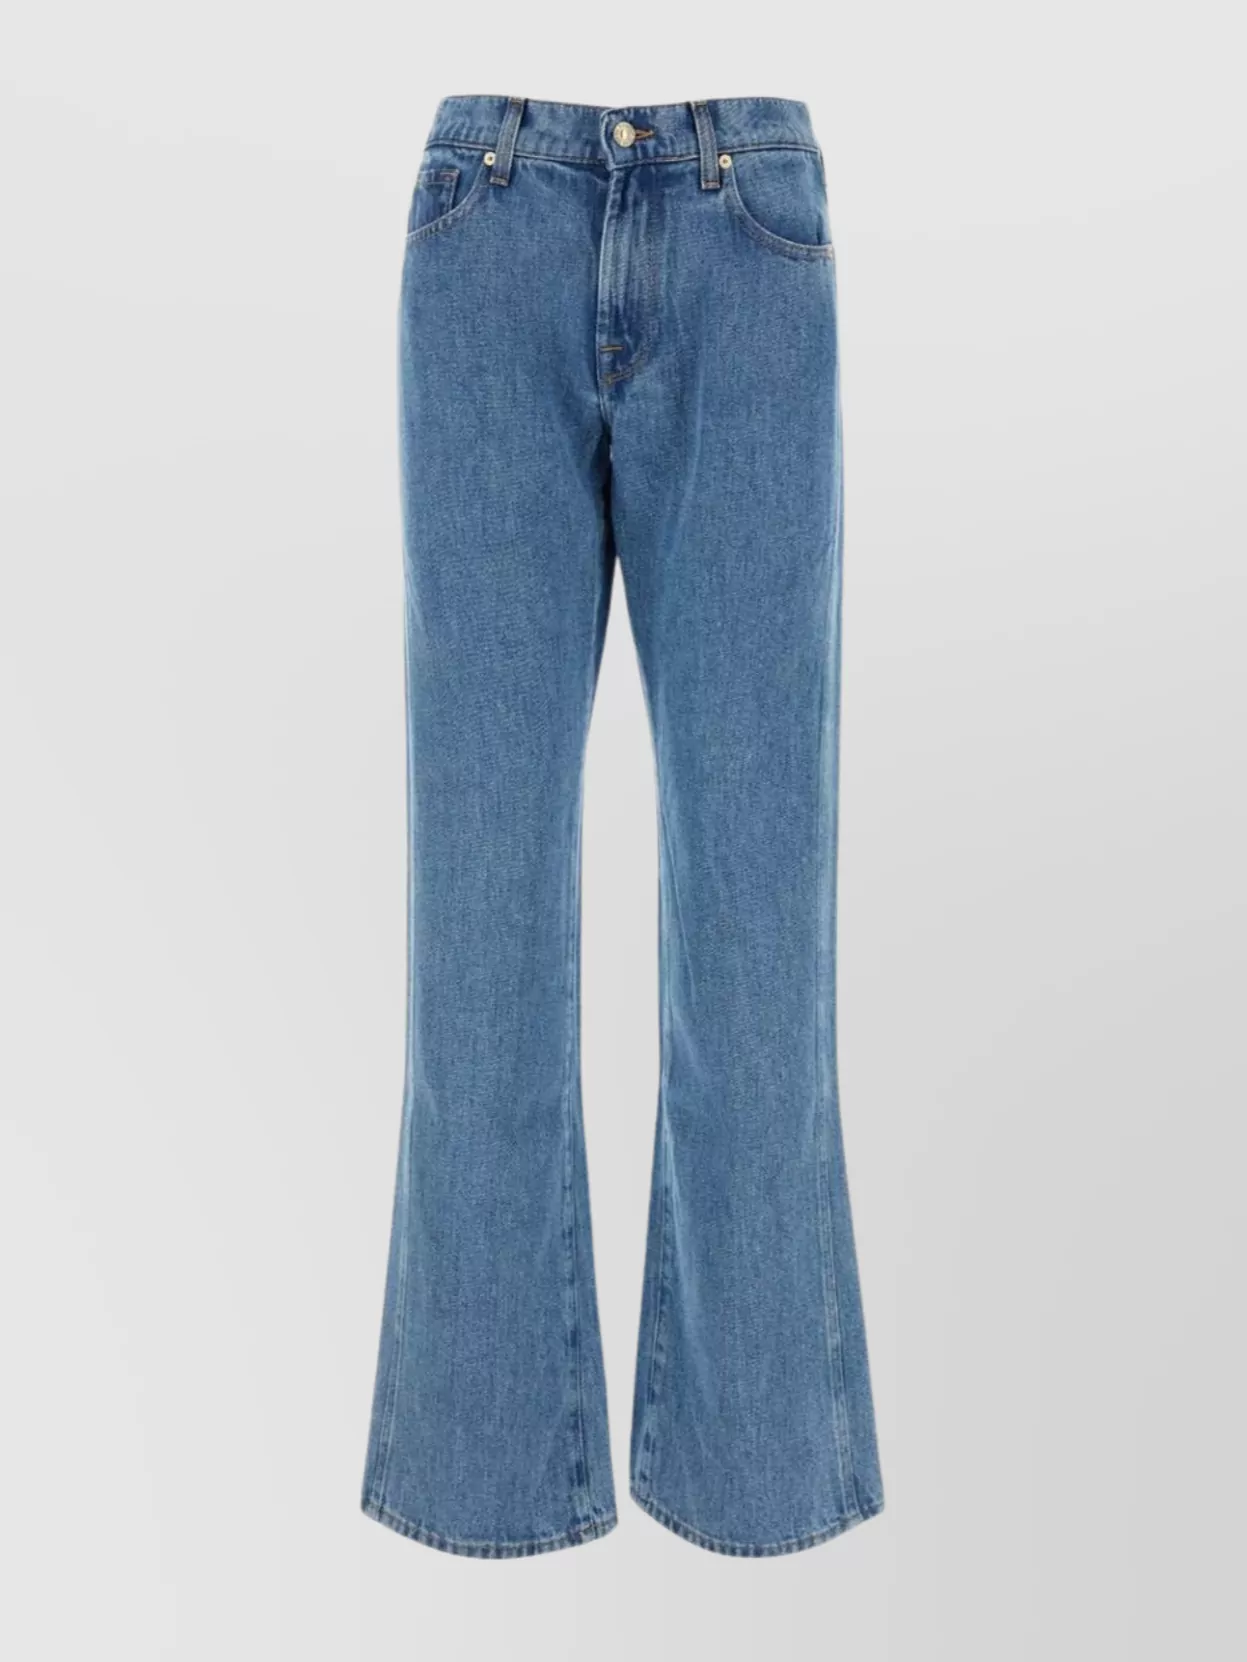 Shop 7 For All Mankind Flared Denim Trousers With Belt Loops